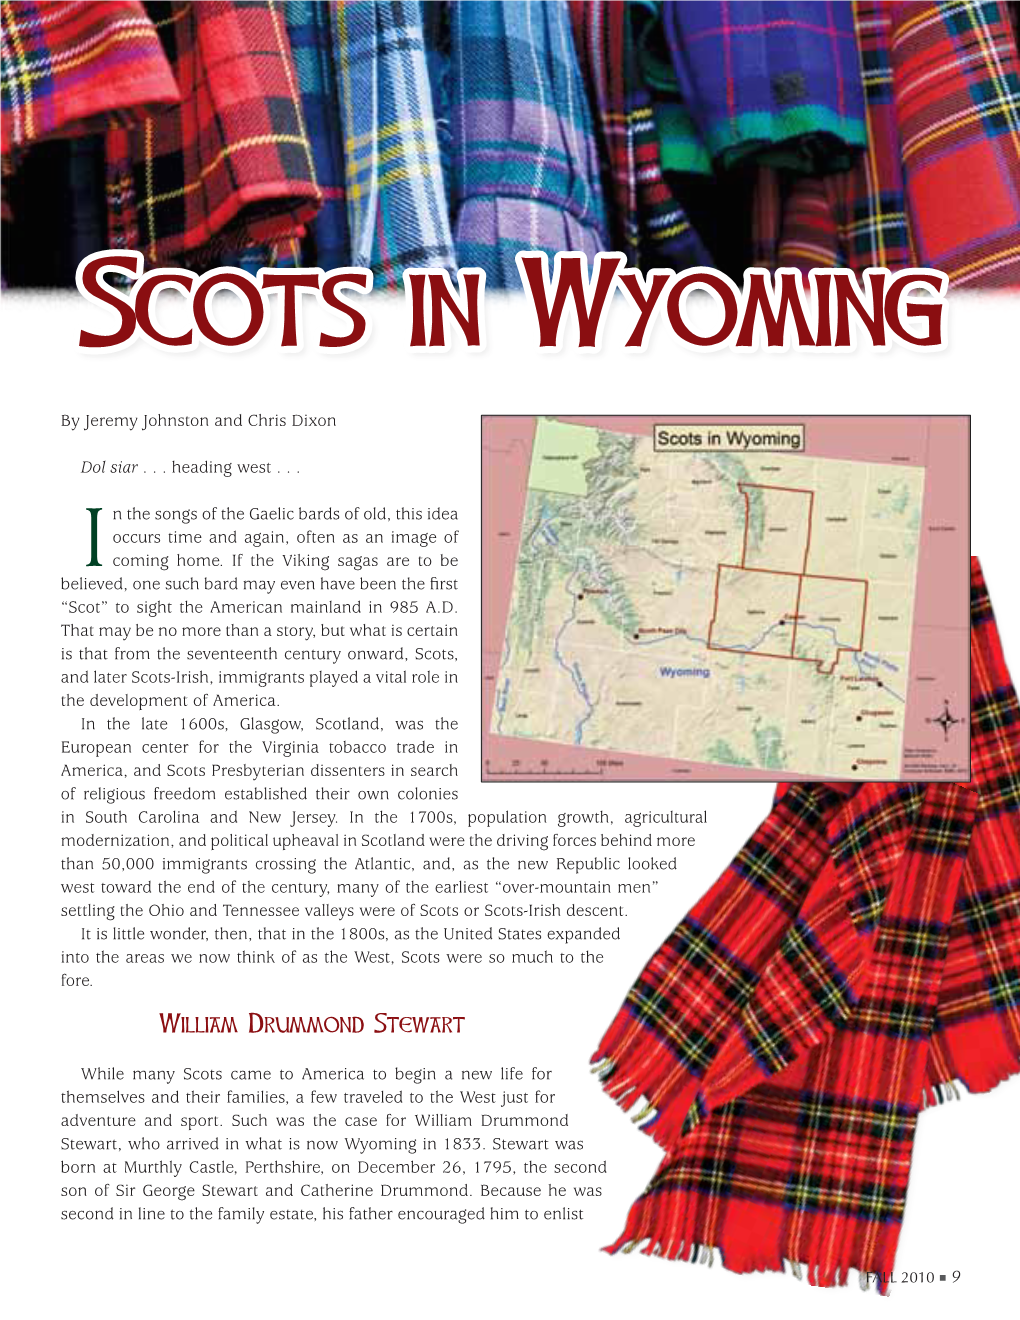 Scots in Wyoming